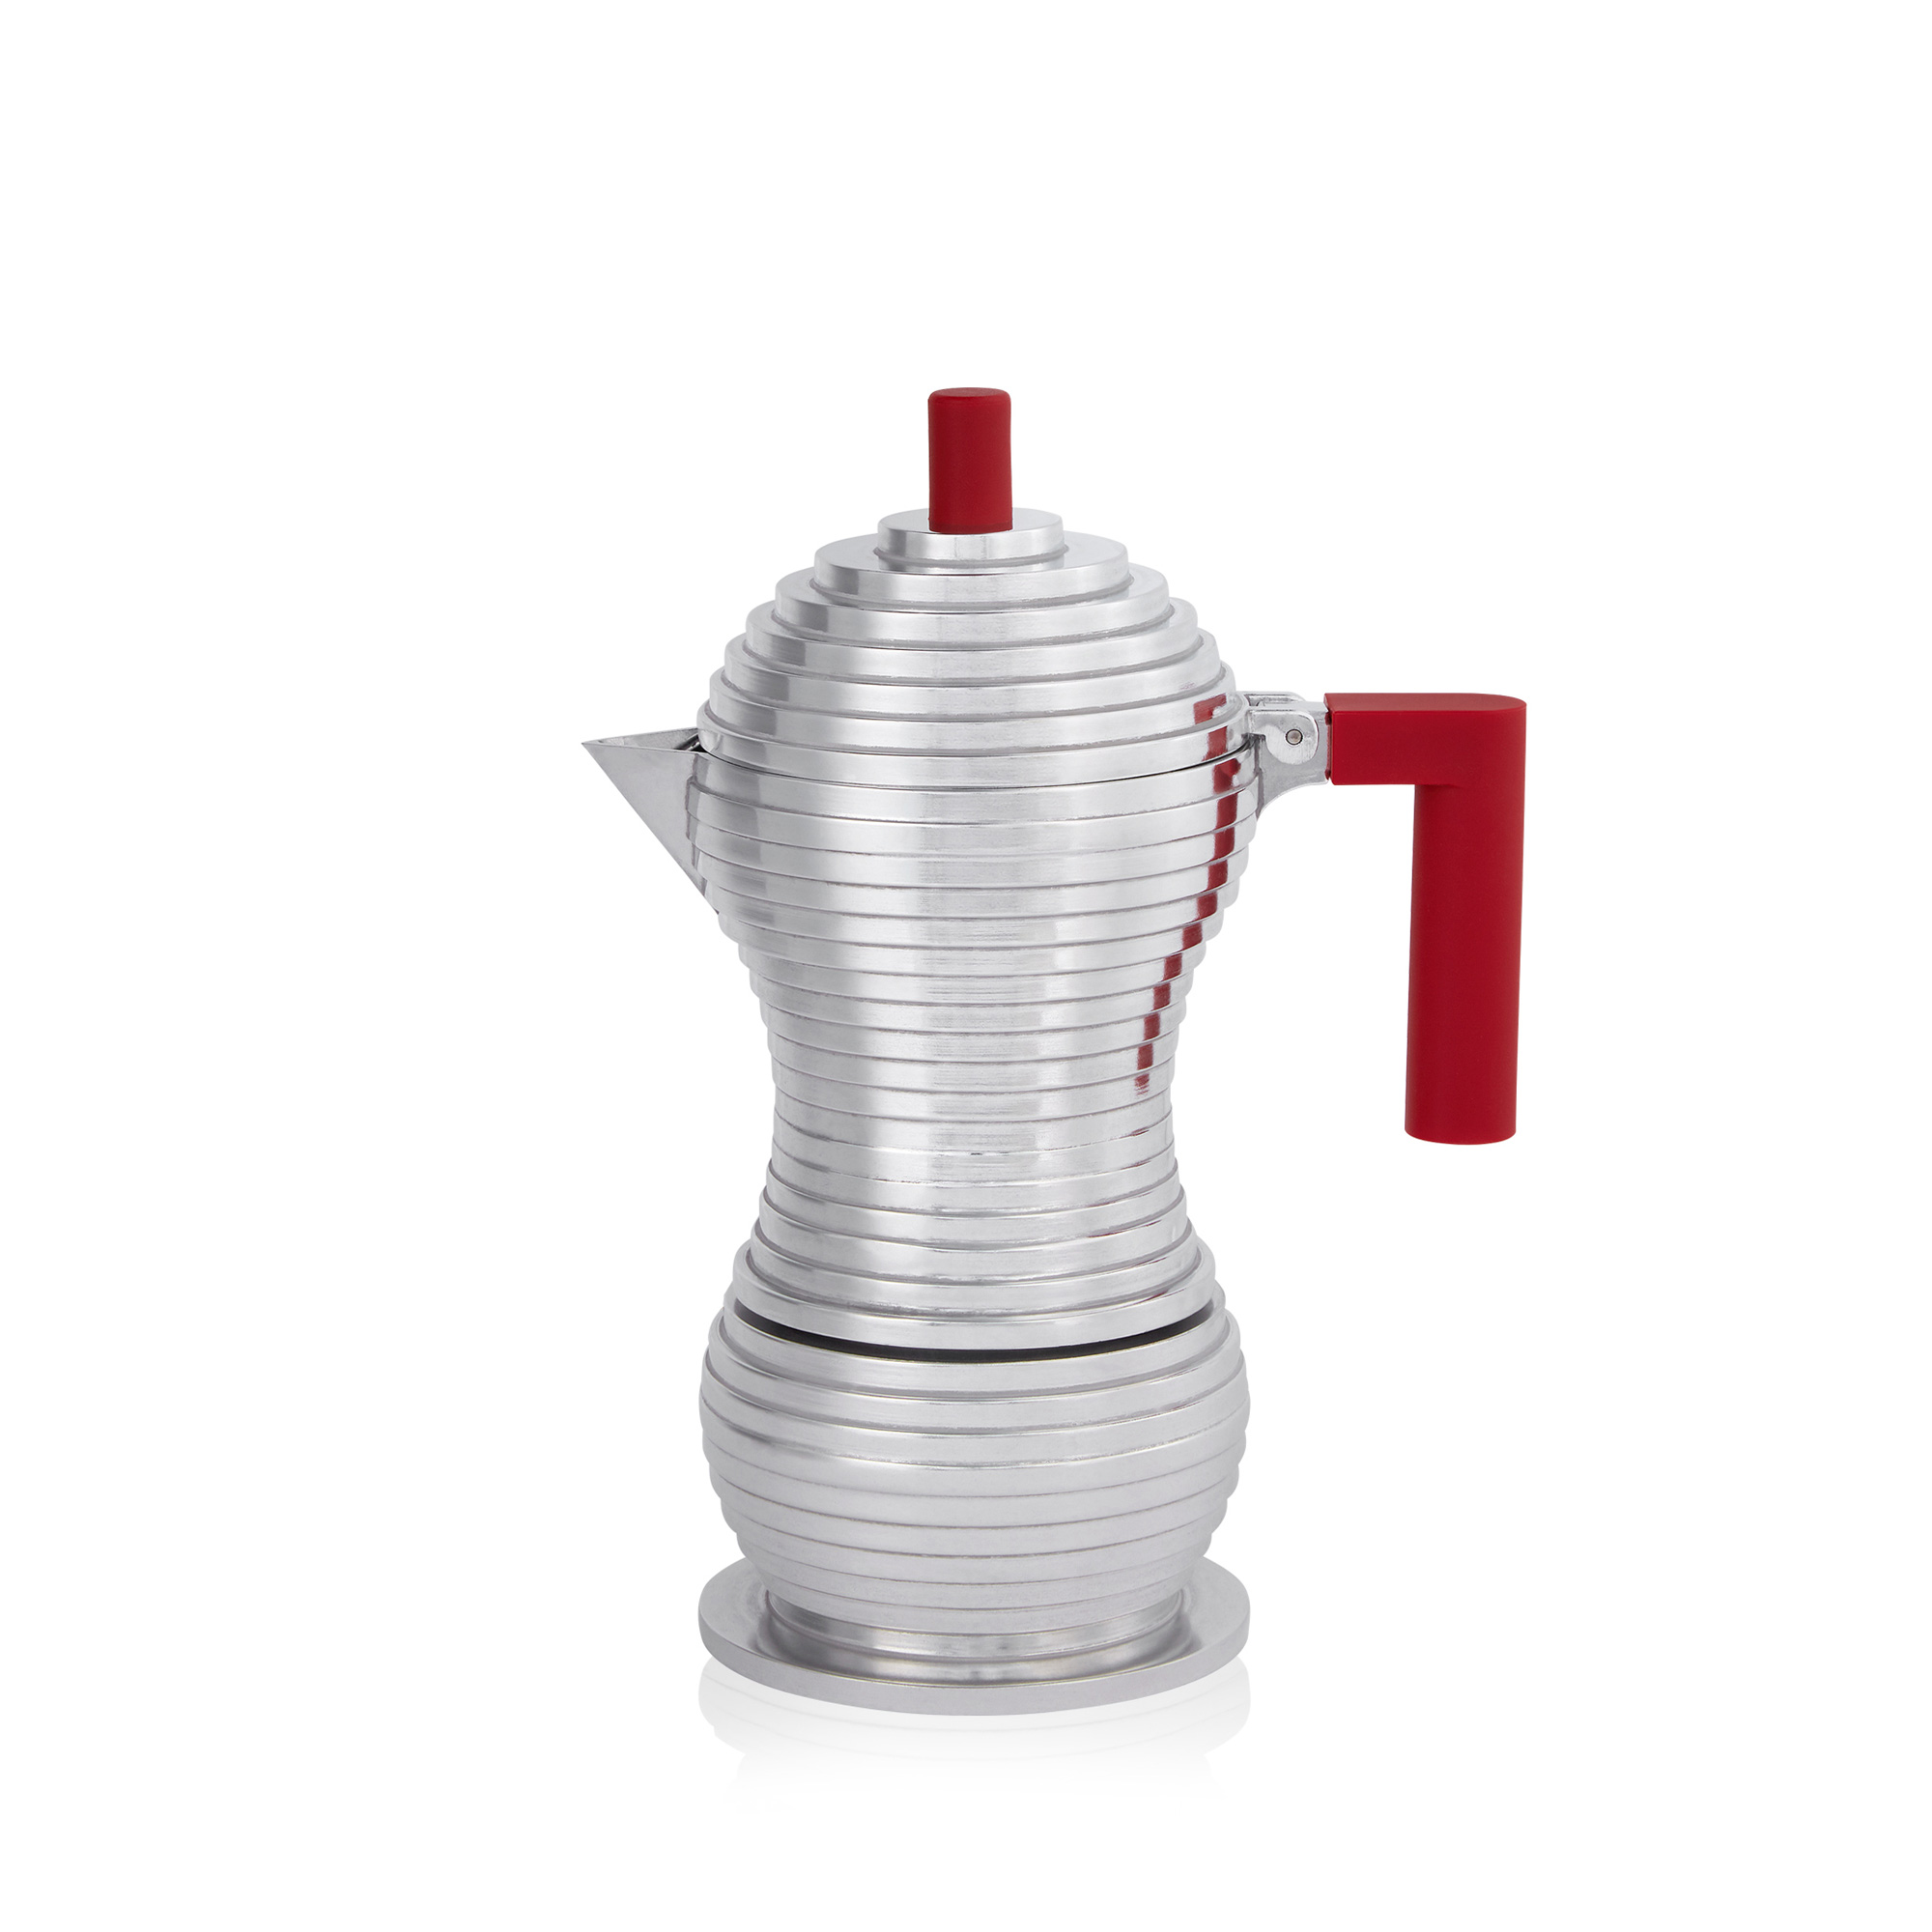 From the collaboration of Alessi and illy, the Pulcini combines the technological expertise of illy with Alessi's impeccable design. This ground breaking moka pot is designed to enhance the coffee's aroma, featuring a unique shape that is ideal to achieve optimal coffee extraction. Made from aluminum, an excellent conductor of heat, it can be used on gas, electric, and glass ceramic cooktops. Packaged in a pop-art style designer box.  3 Cup (5.25oz.) capacity. (L: 6" W: 3.5" H: 8")